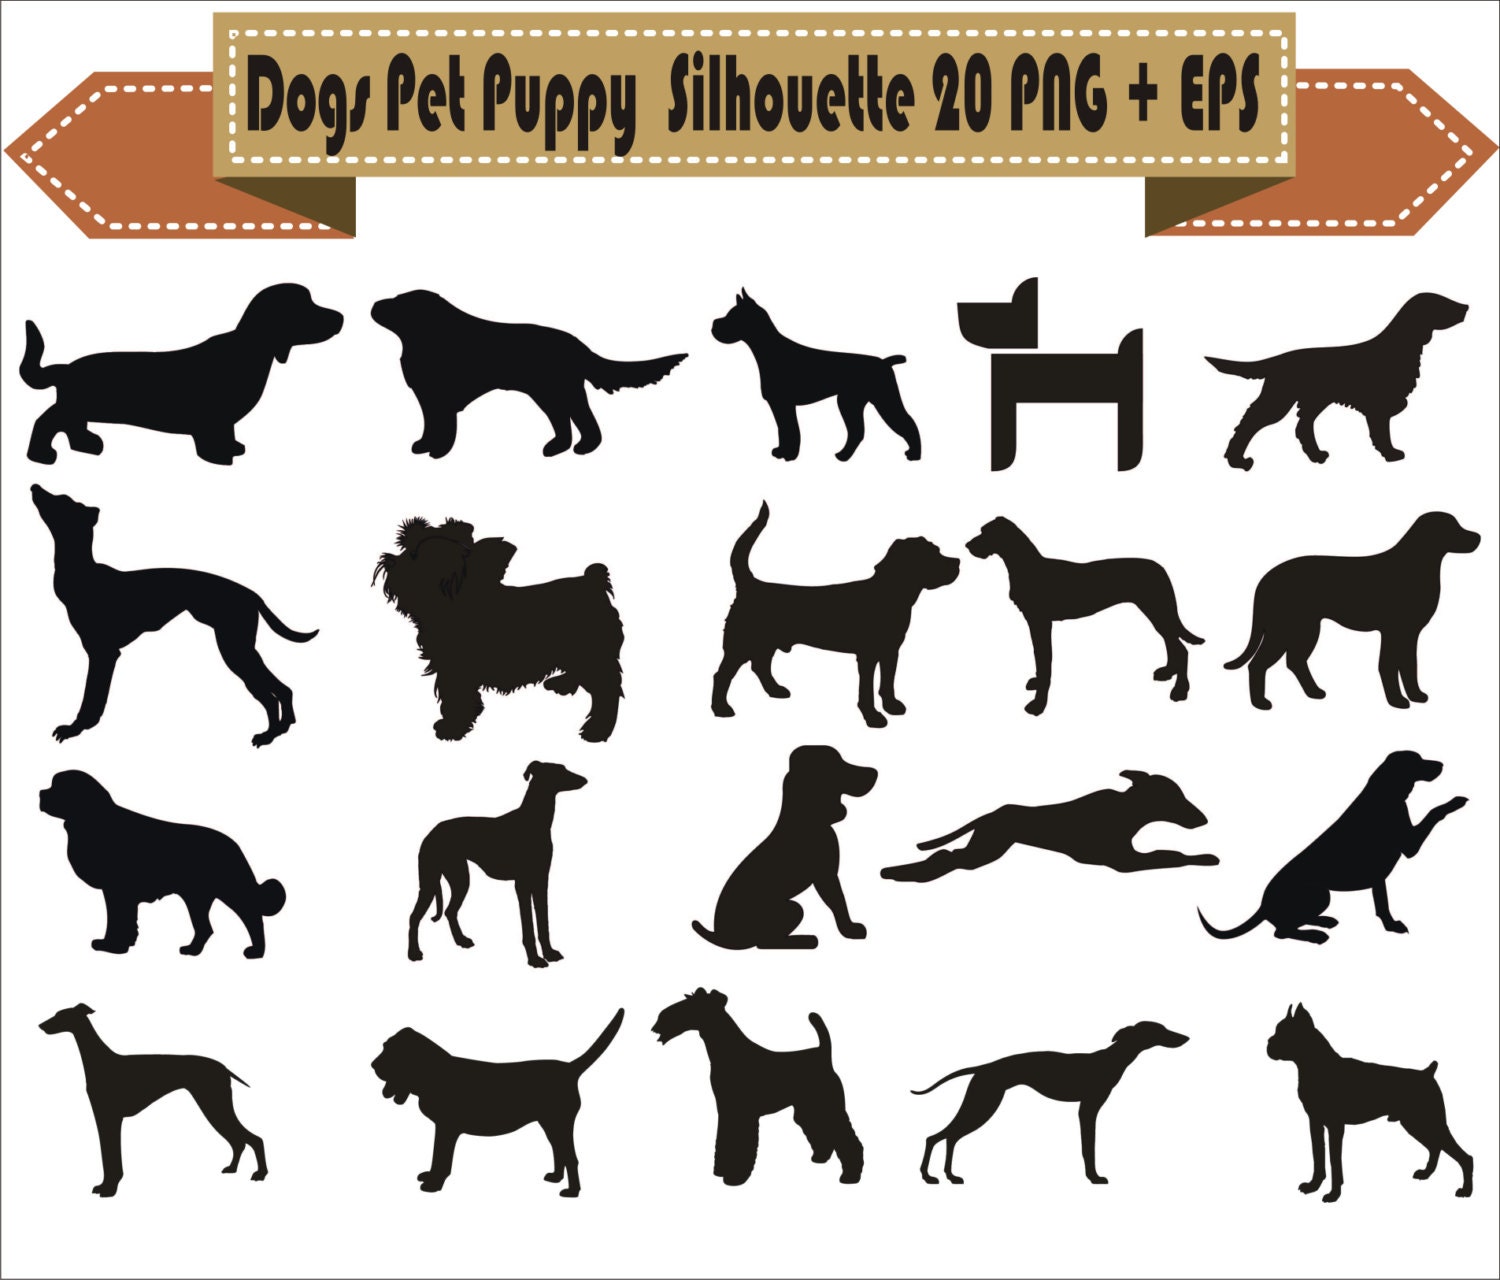 Download Dog Dogs Puppy Pup Pet Dogy Pack Silhouette Vector Clipart PNG